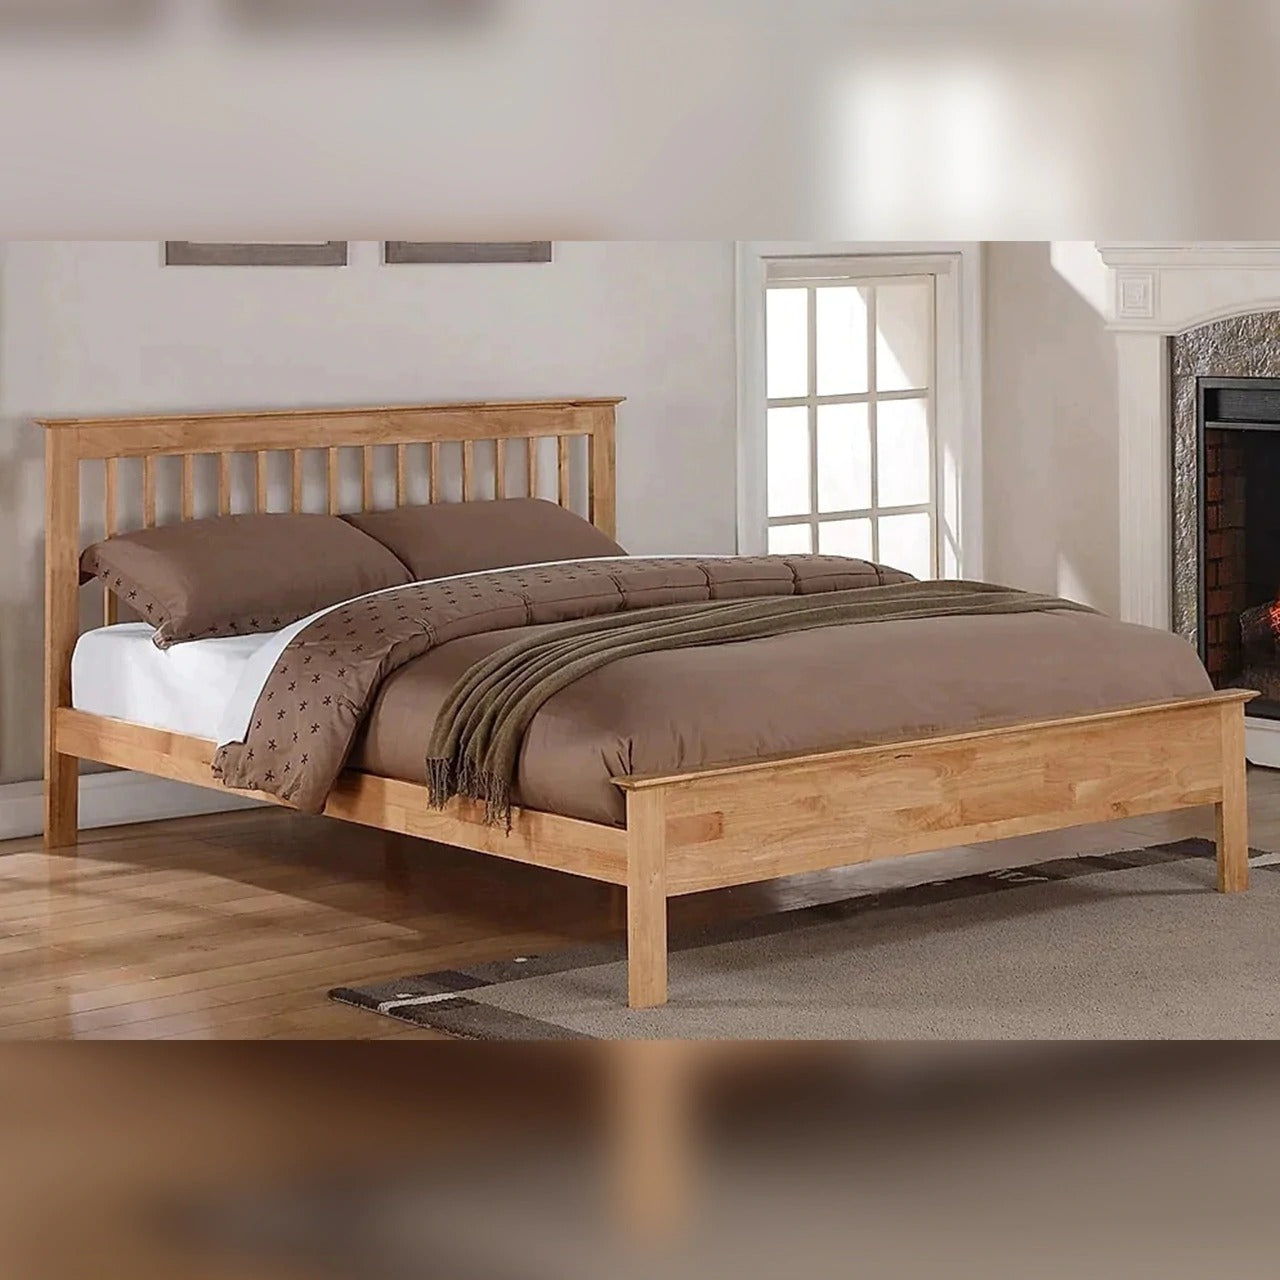 Wooden Bed, Wooden Bed Price, Teak Wood Bed, Modern Wooden Sofa Bed